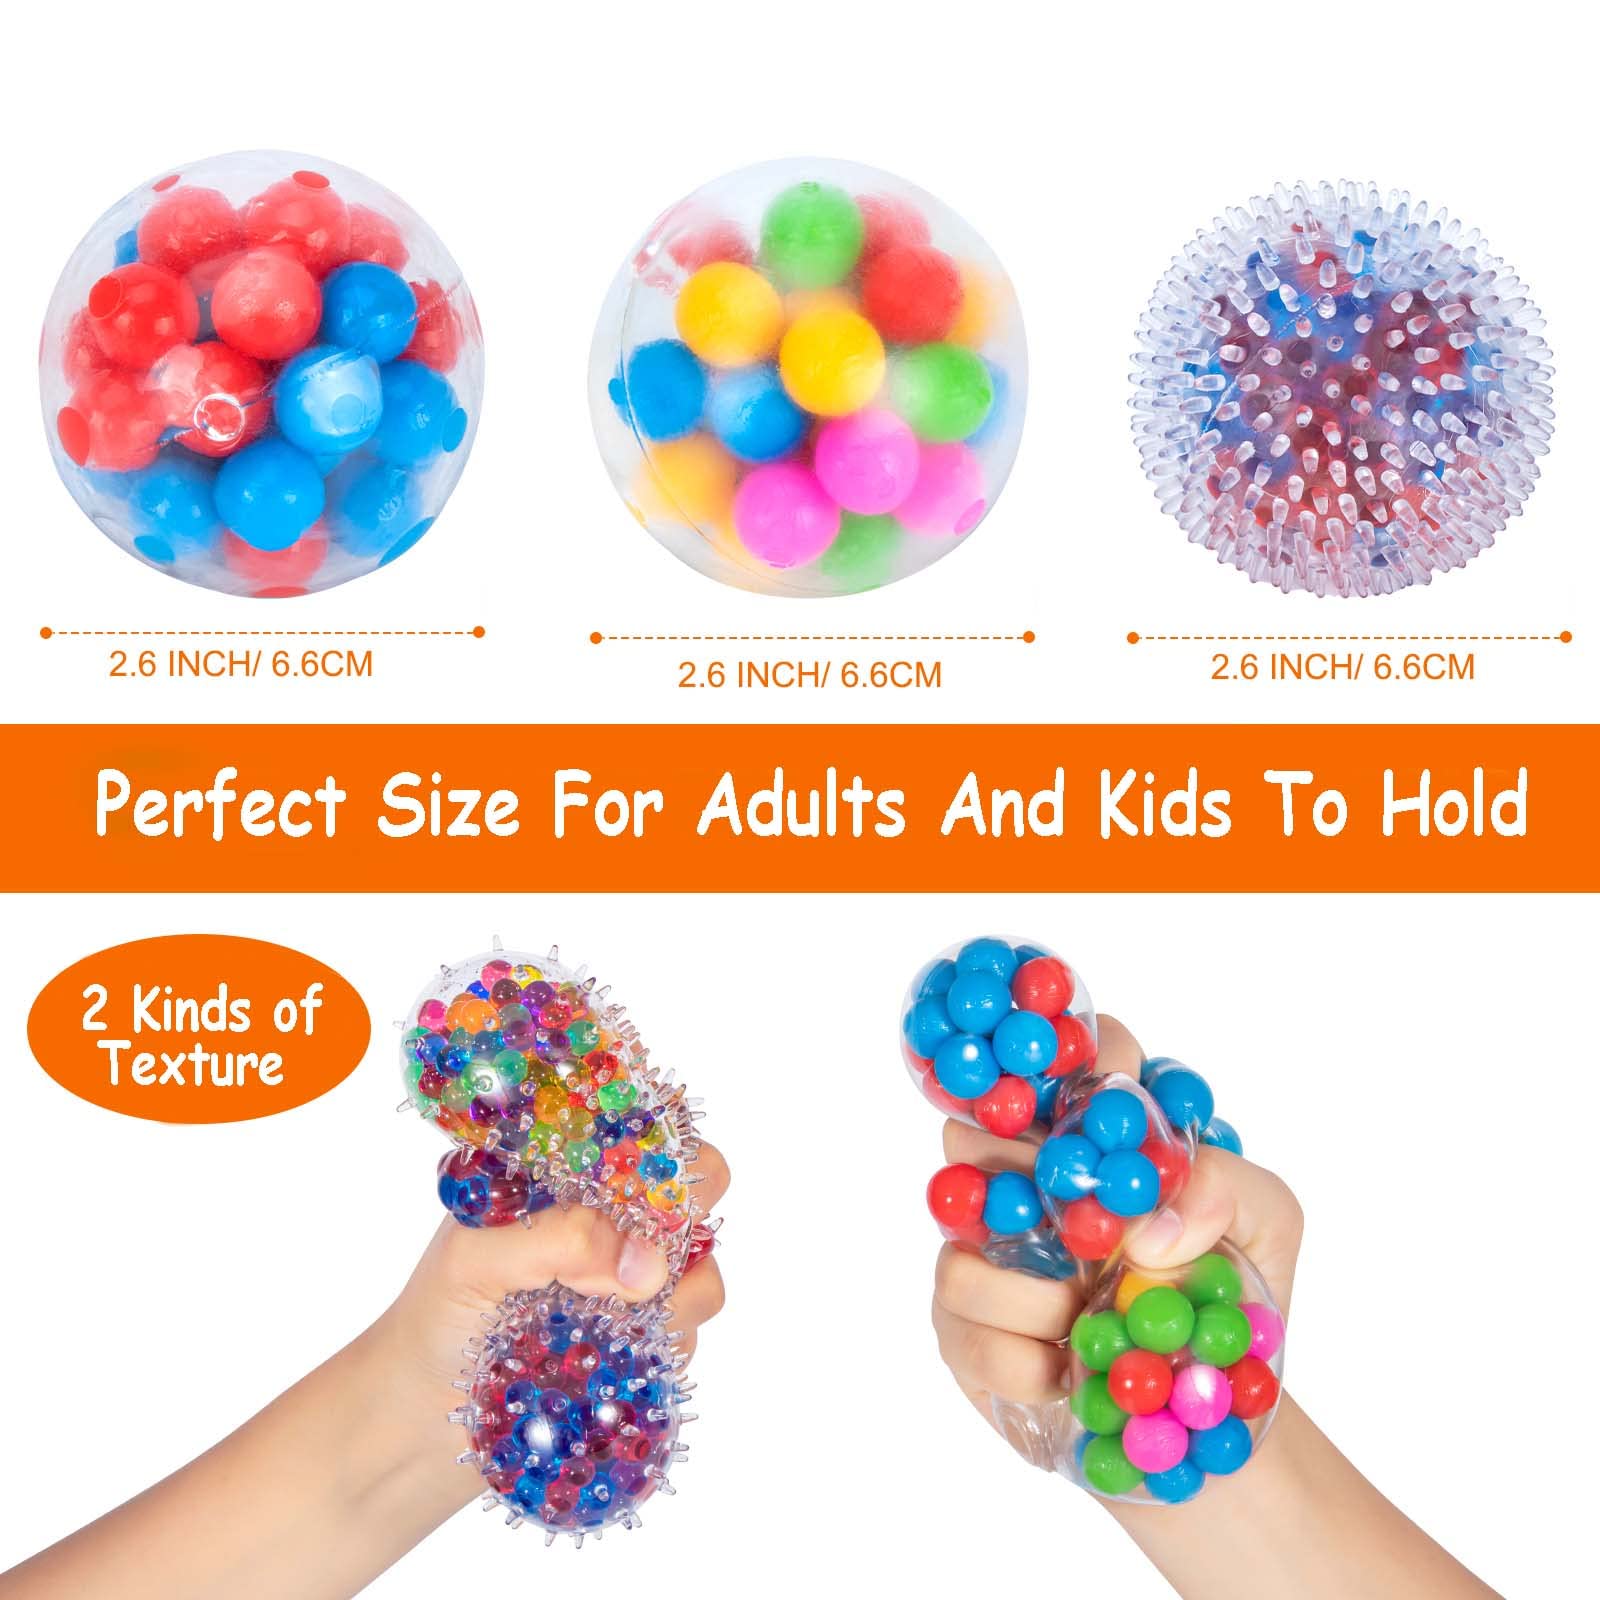 Stress Balls for Kids and Adults, 4 Funny Squishies Balls Stress Ball Fidget Toy for Anxiety Autism ADHD, Water Beads Christmas Sensory Toys for Toddlers Boys Girls Birthday Gifts, Home, Office